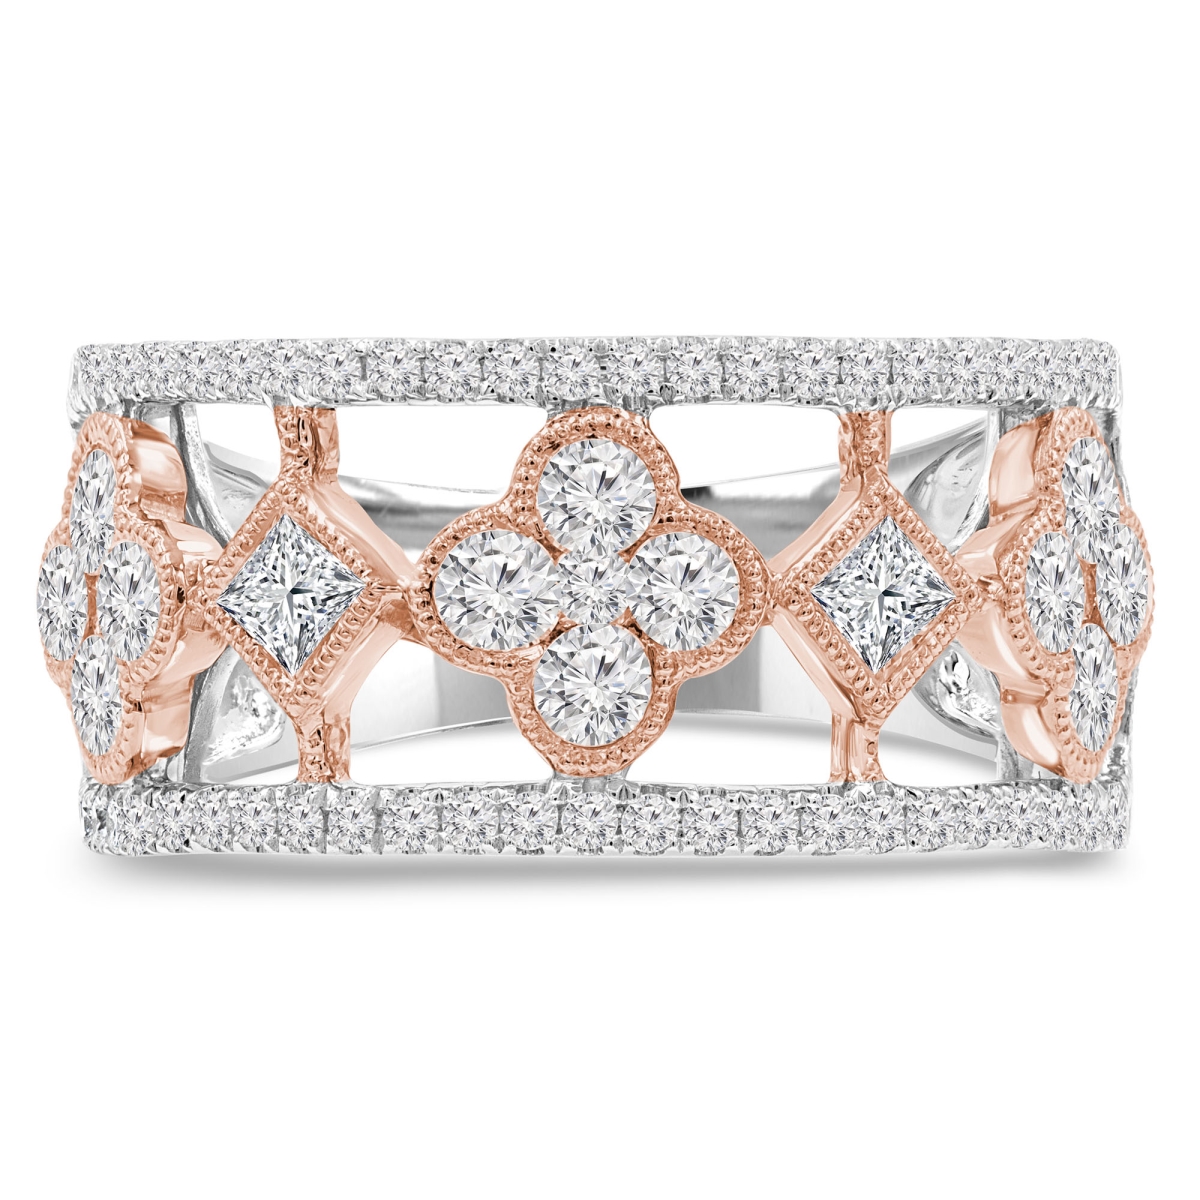 Picture of Majesty Diamonds MDR210138-4.5 1.13 CTW Princess Diamond Cocktail Ring in 14K Two-Tone Gold - Size 4.5